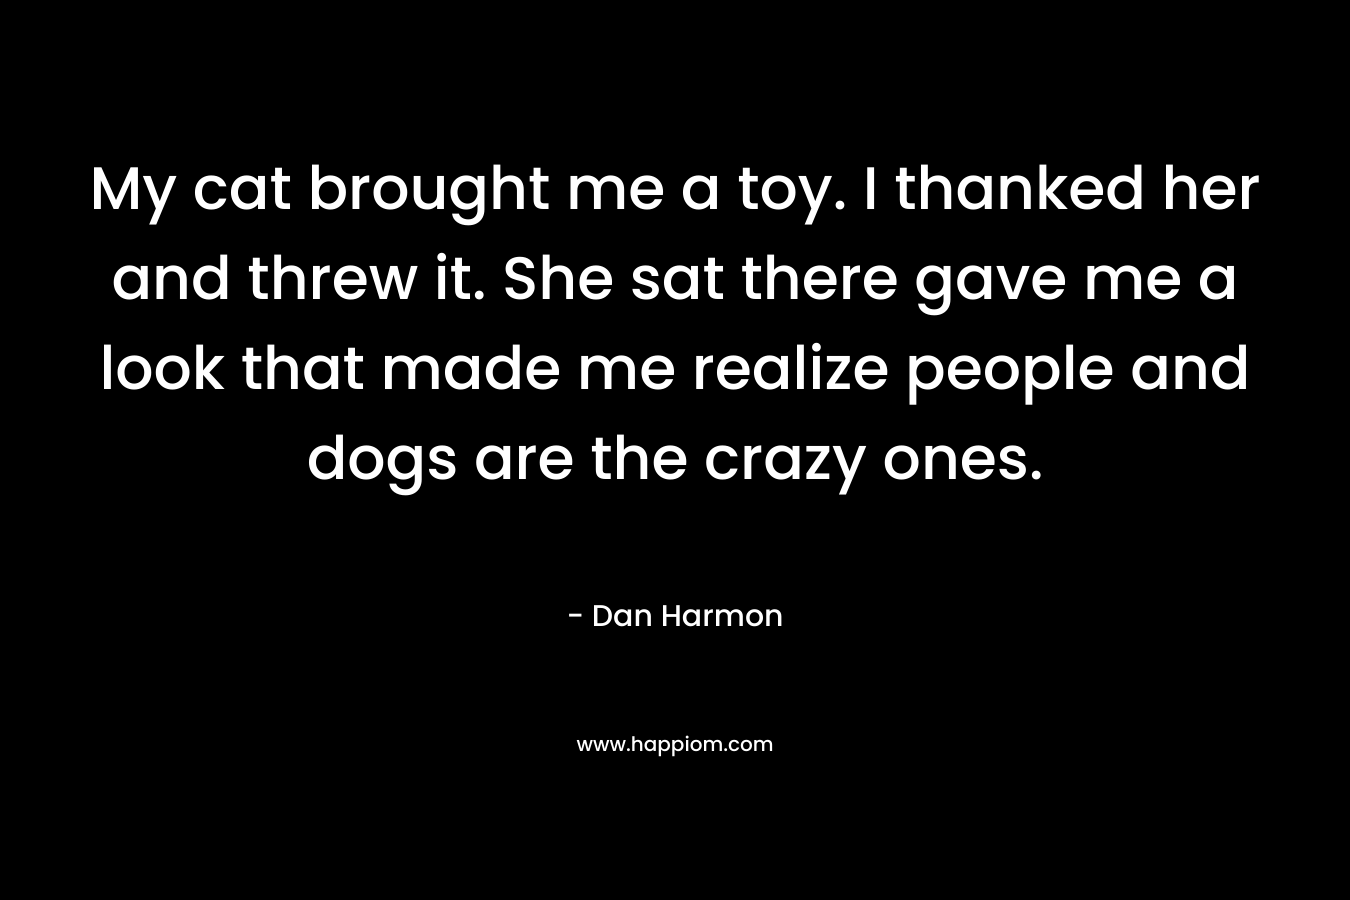 My cat brought me a toy. I thanked her and threw it. She sat there gave me a look that made me realize people and dogs are the crazy ones. – Dan  Harmon